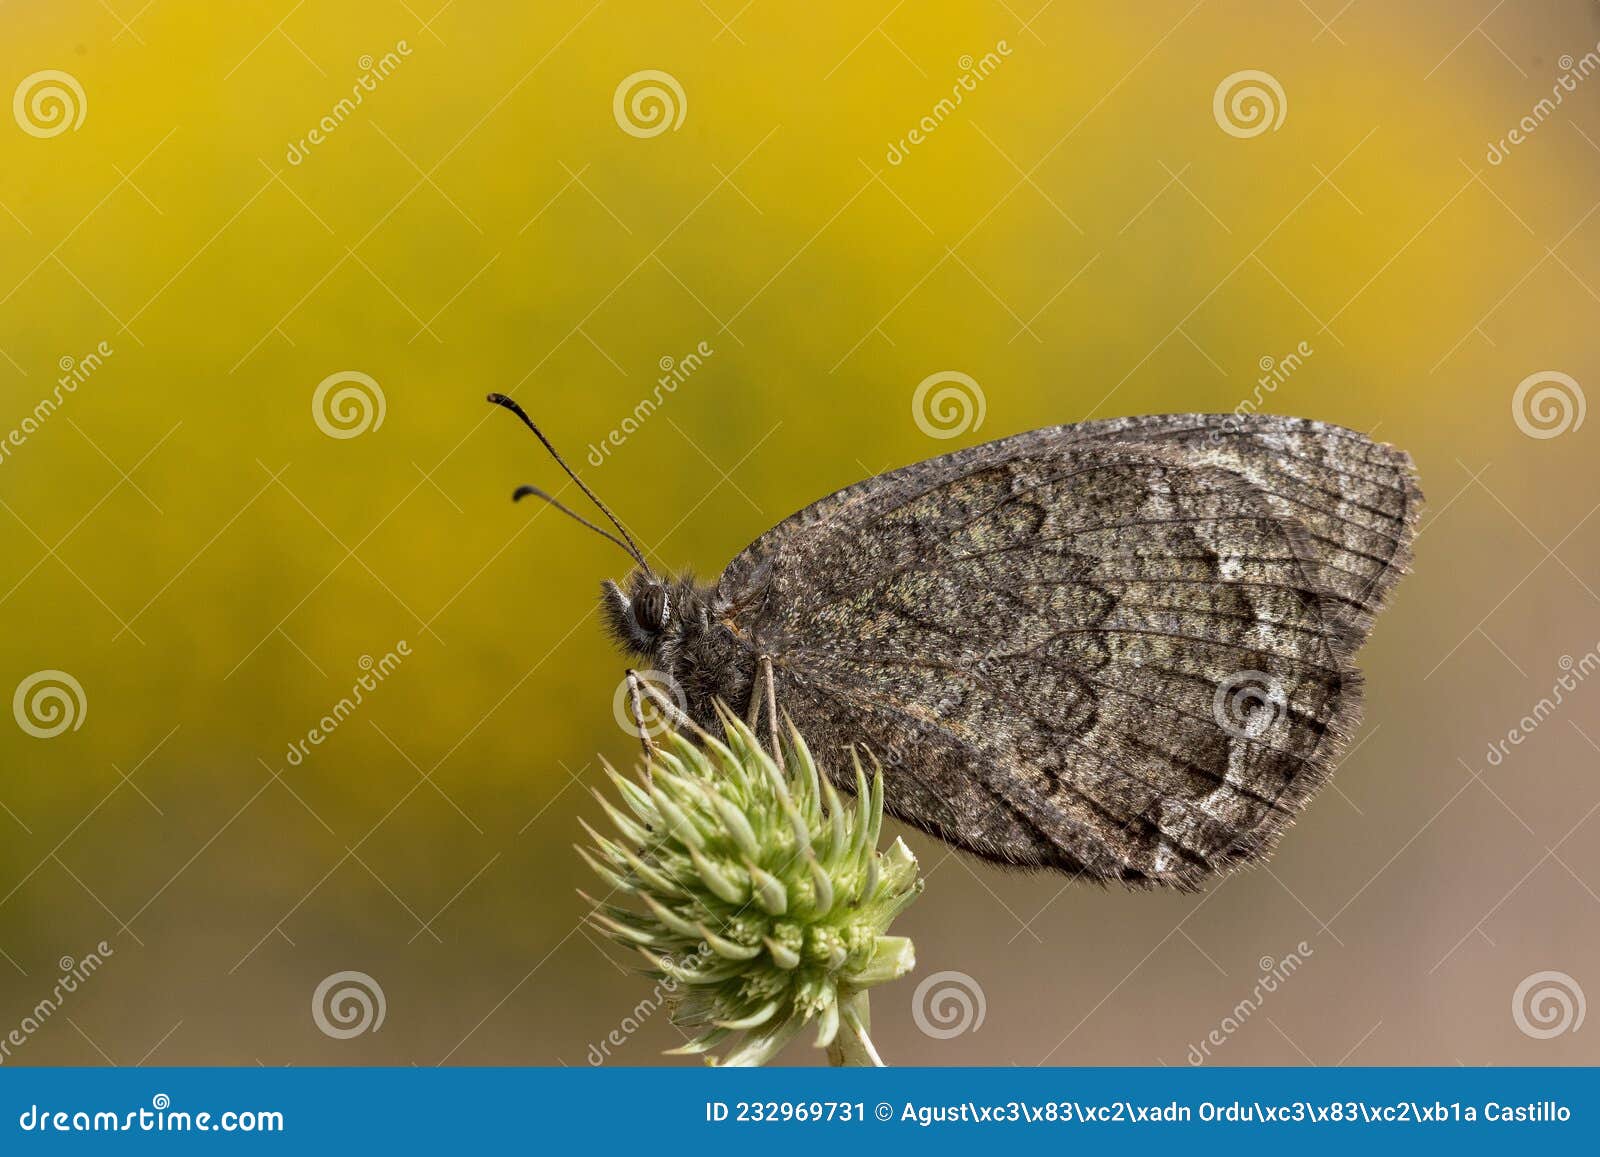 day butterfly perched on flower, satyrus actaea